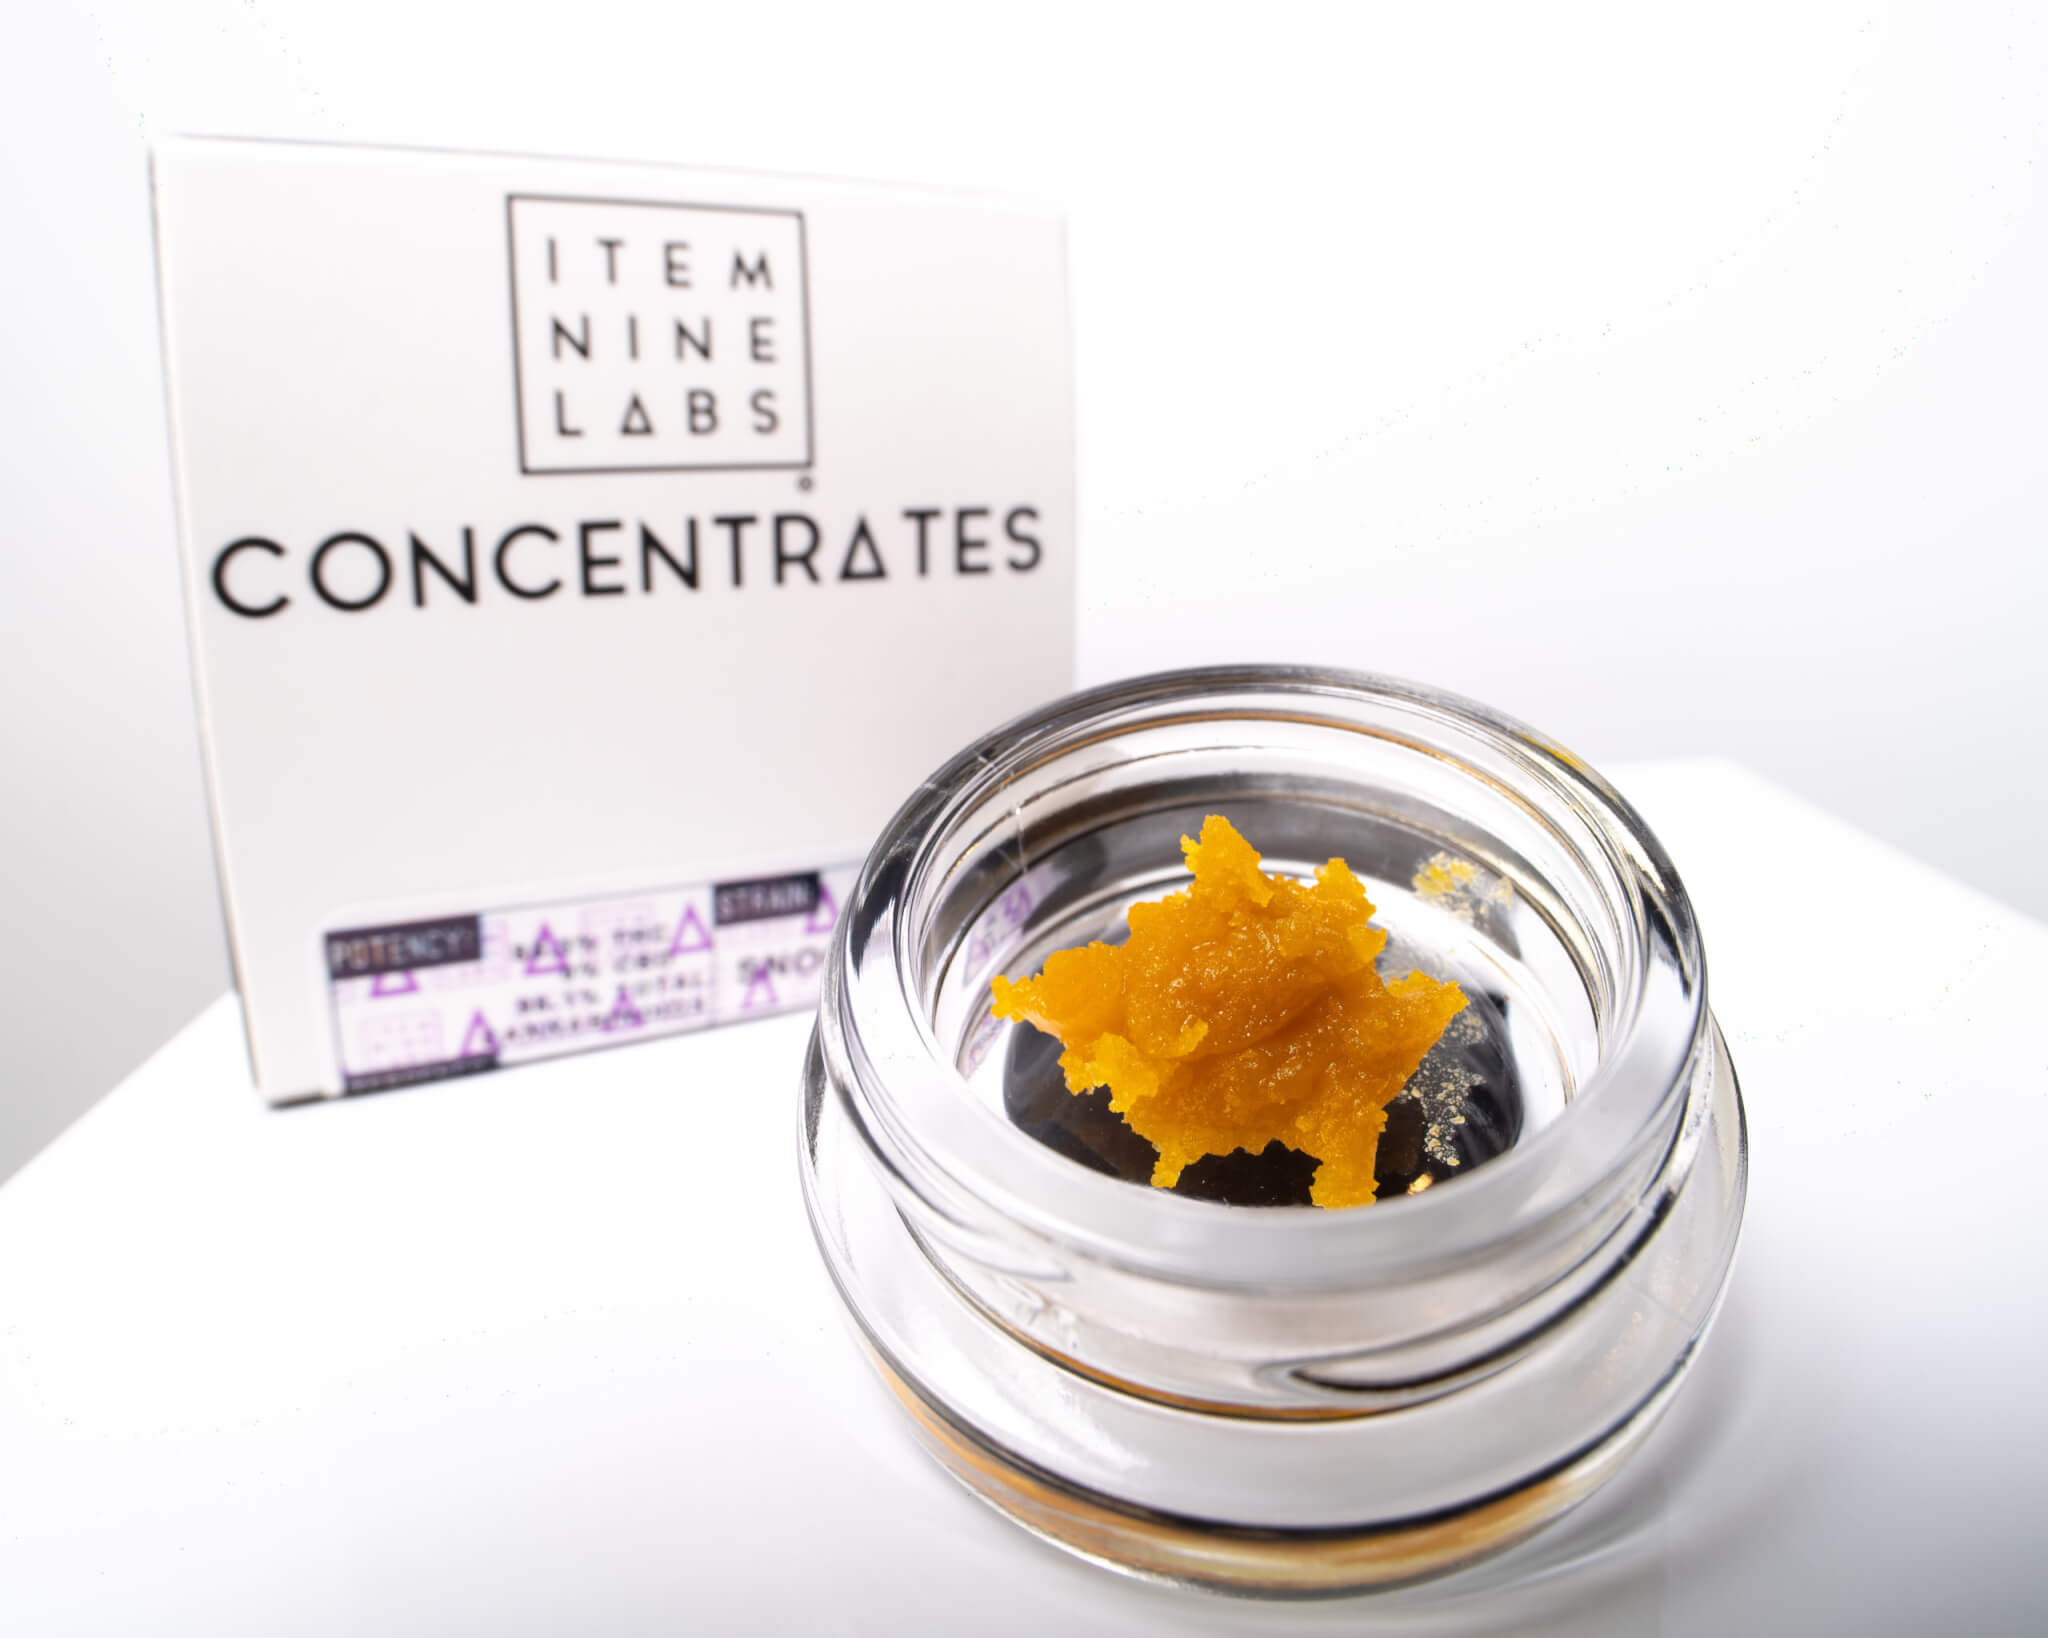 Item Nine Labs Concentrates